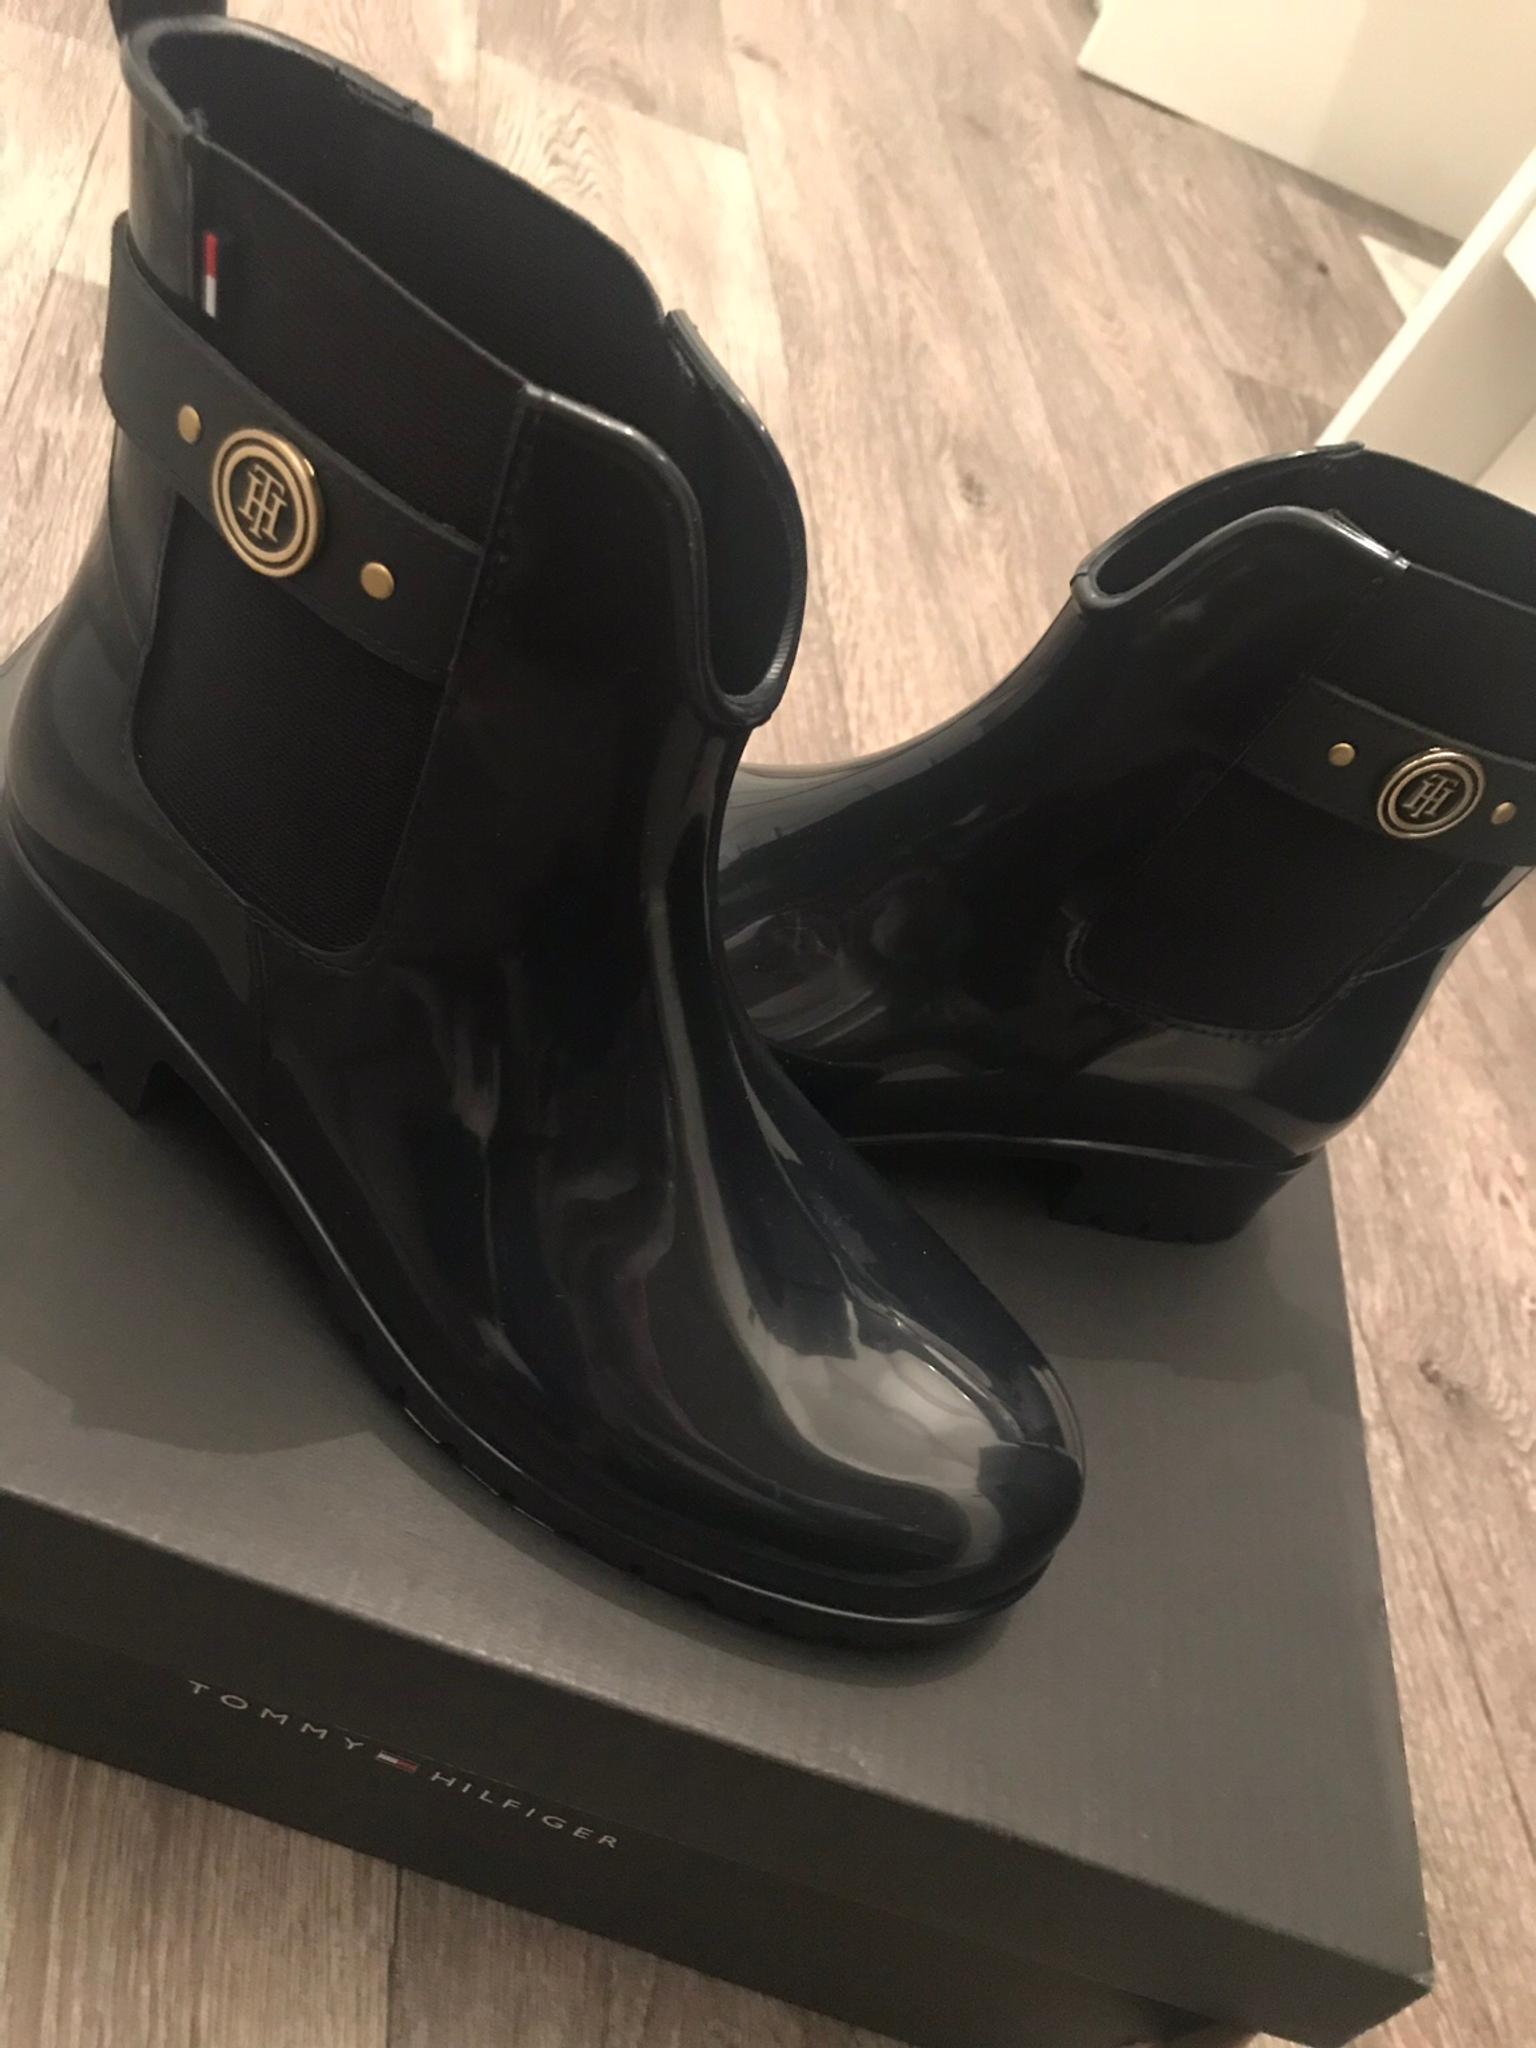 tommy hilfiger welly boots